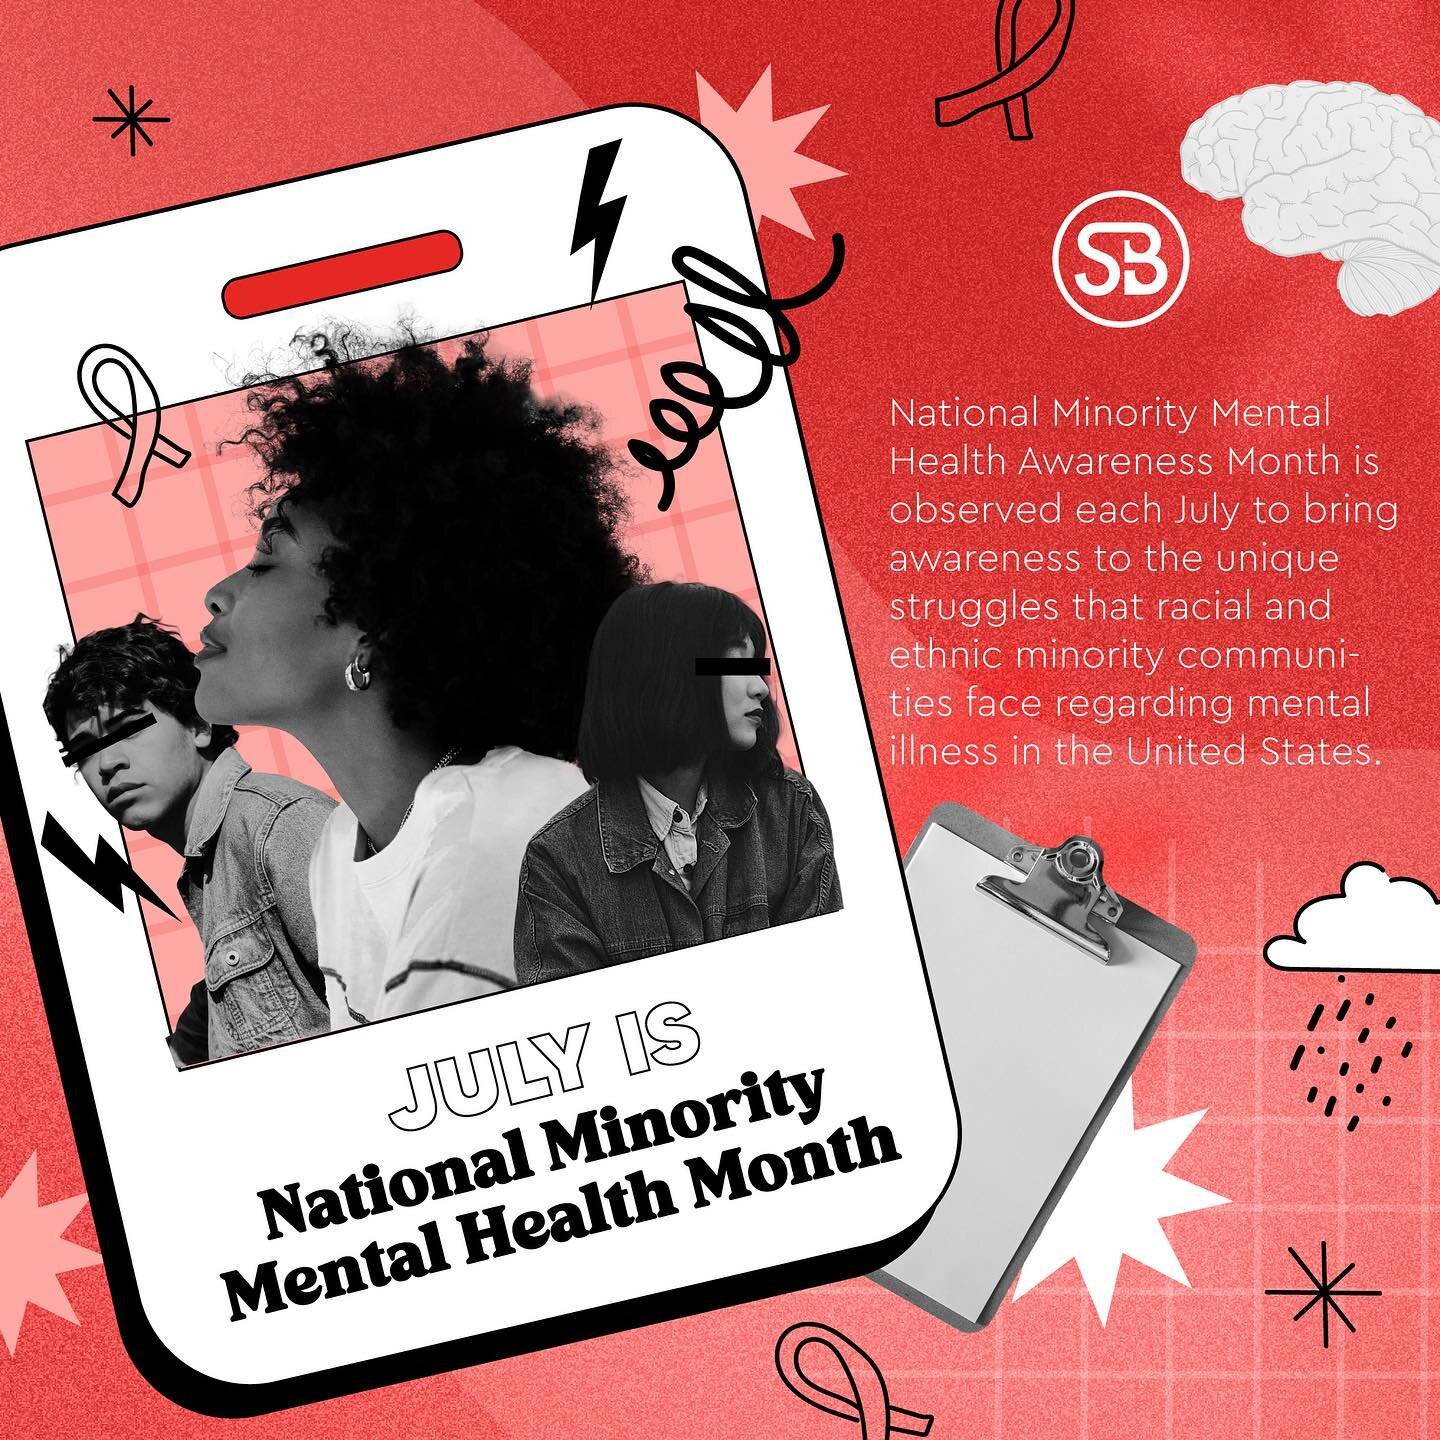 July is Minority Mental Health Month. 

According to @AFSP, &quot;Members of the BIPOC (Black, Indigenous, and People of Color) communities, and other minorty groups often face disproportionate inequitities in care, support or mental health services 